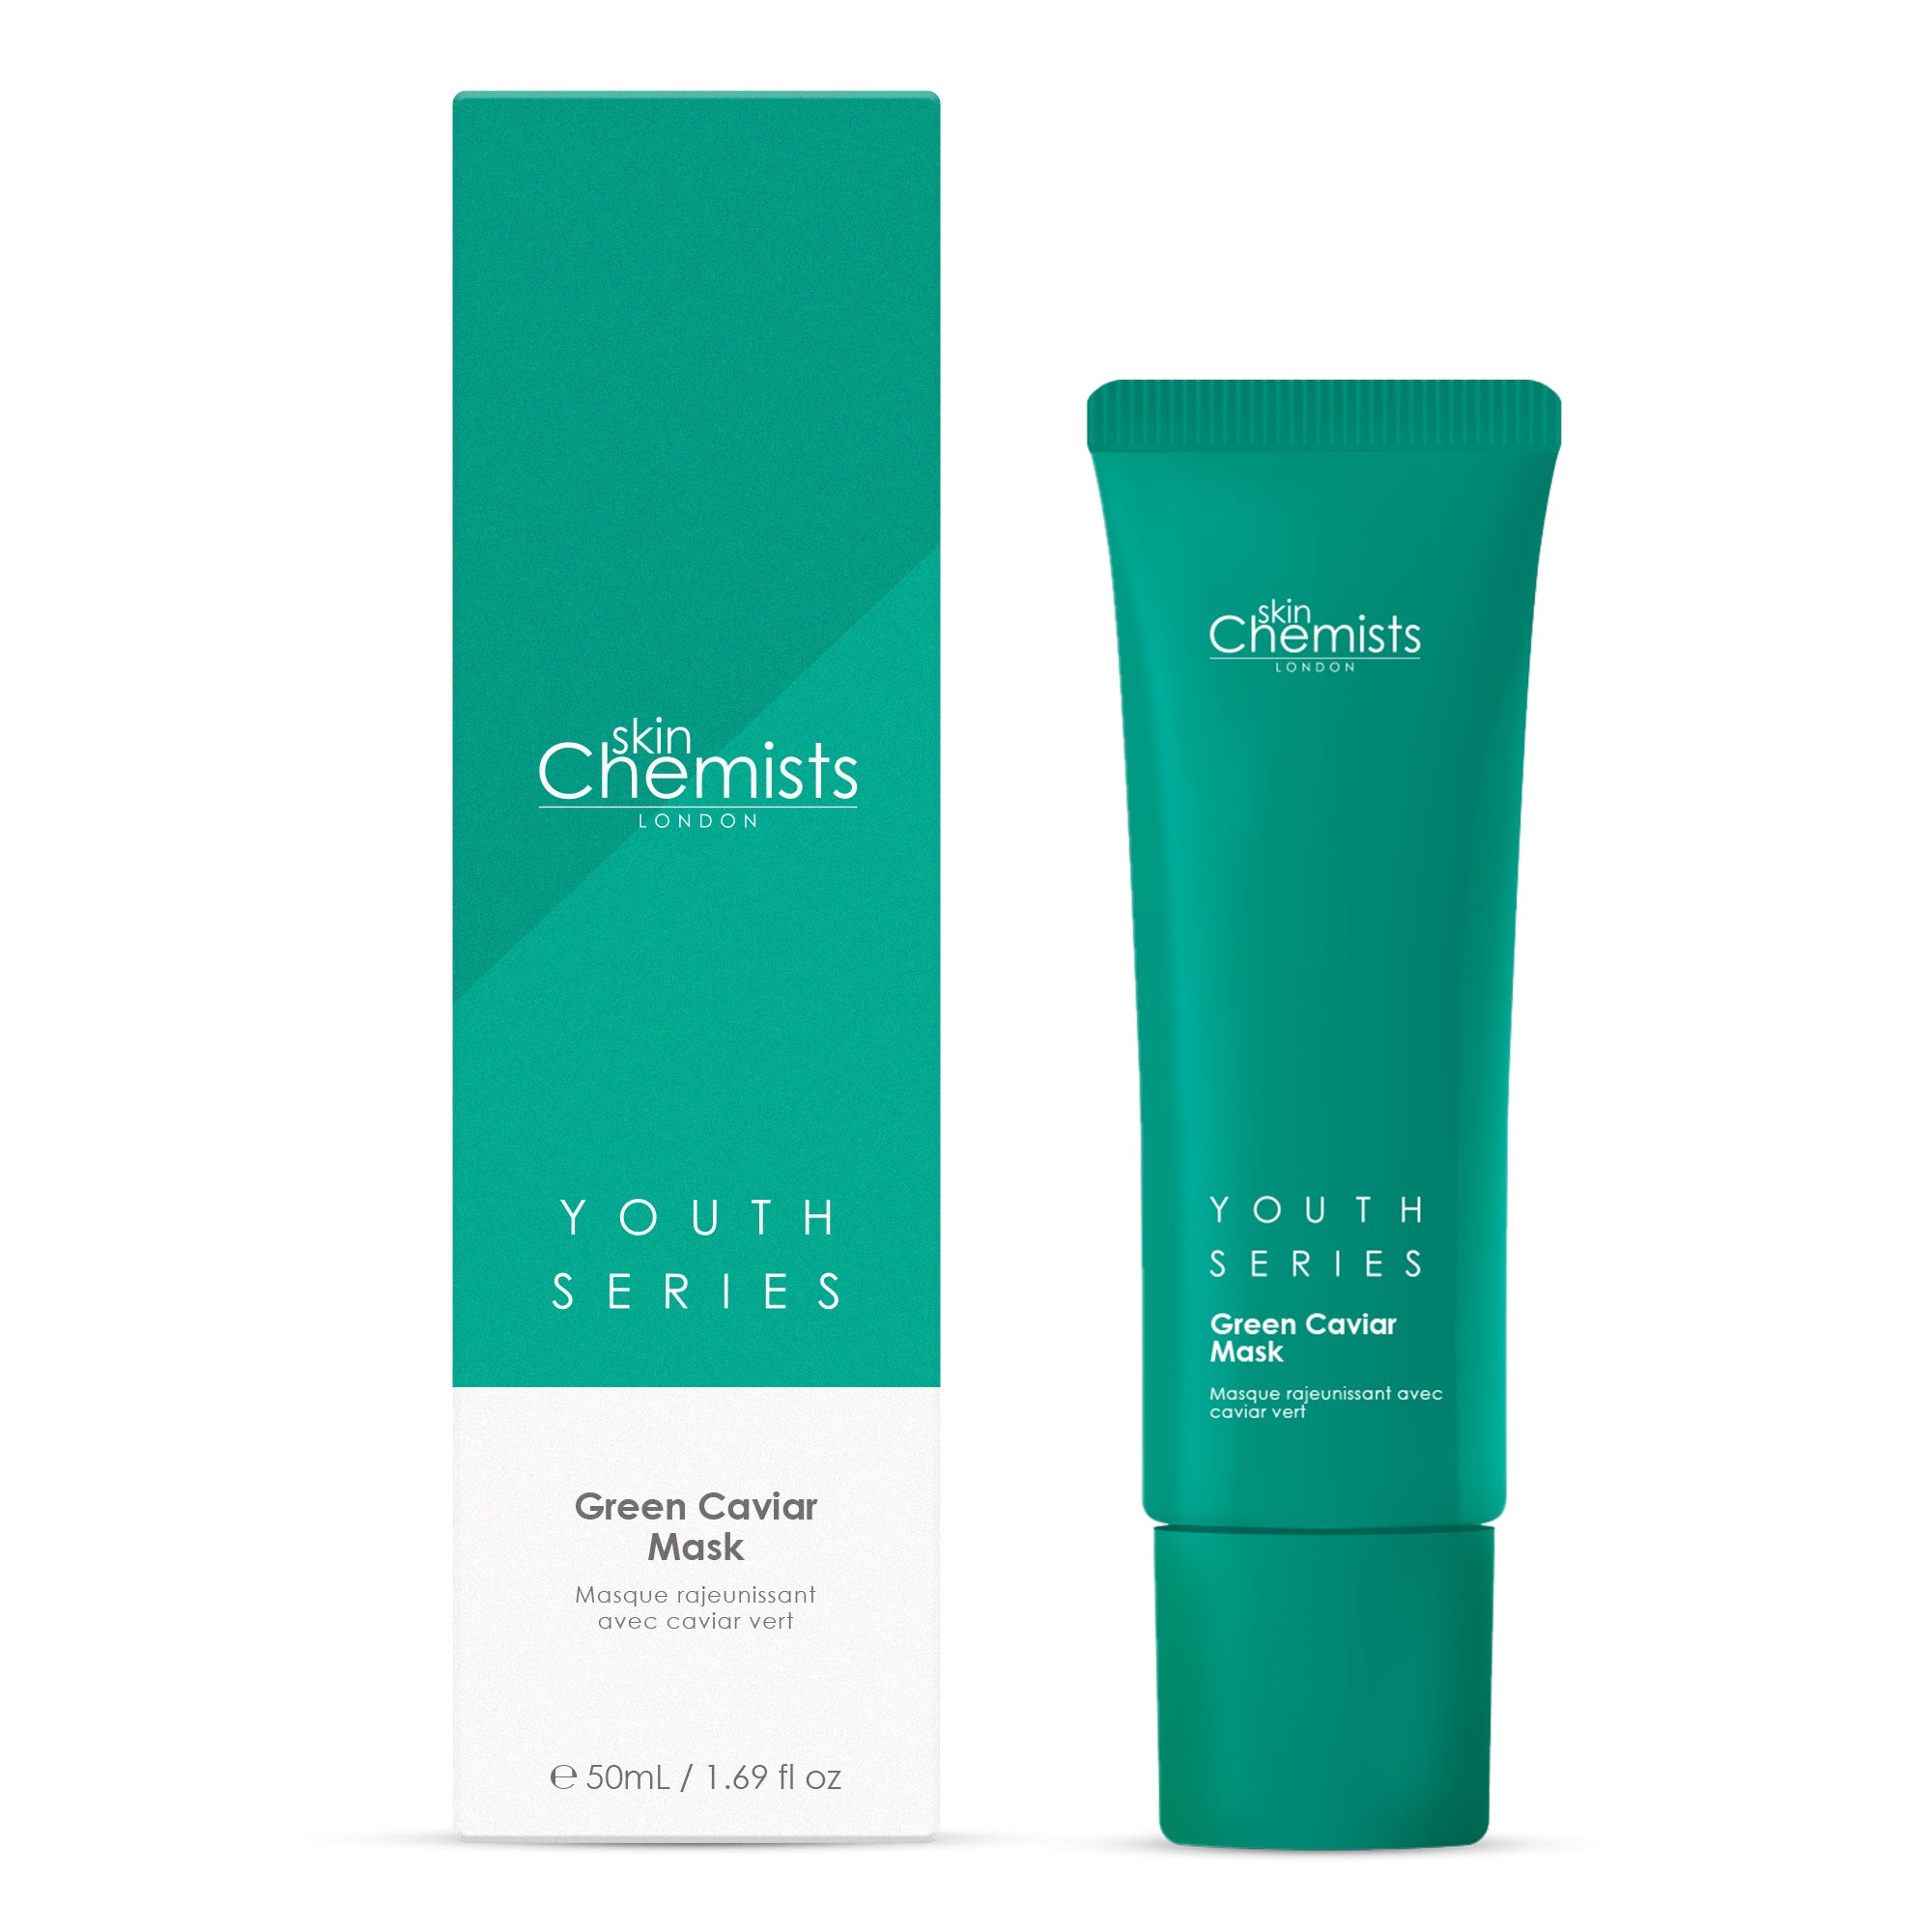 skinChemists Youth Series Ensemble complet Green Caviar Essentials